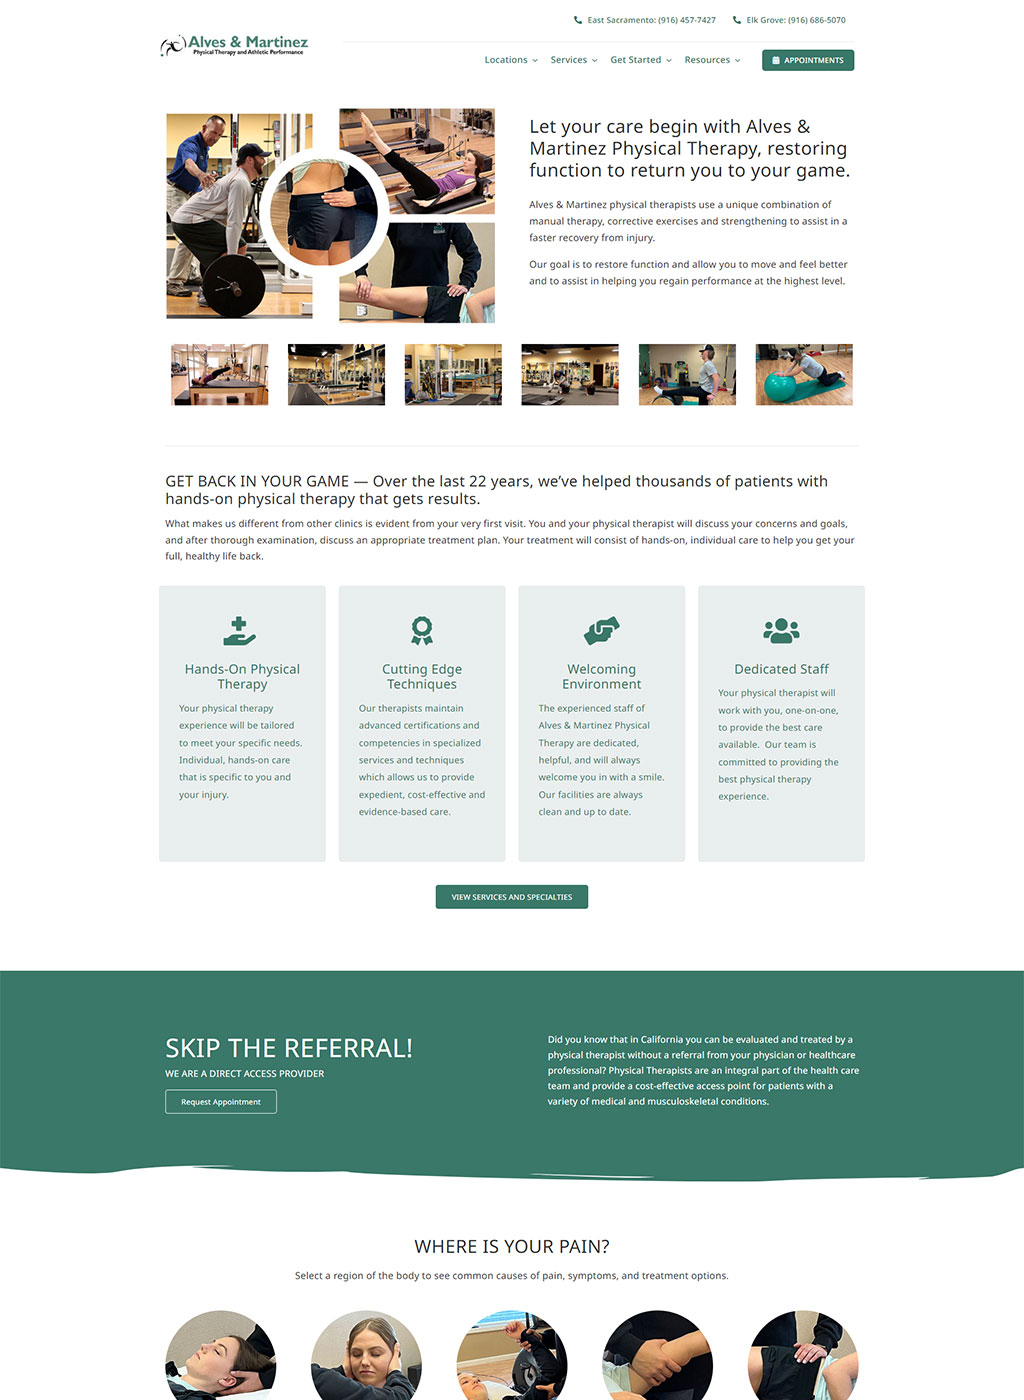 Website developed for Alves & Martinez Physical Therapy